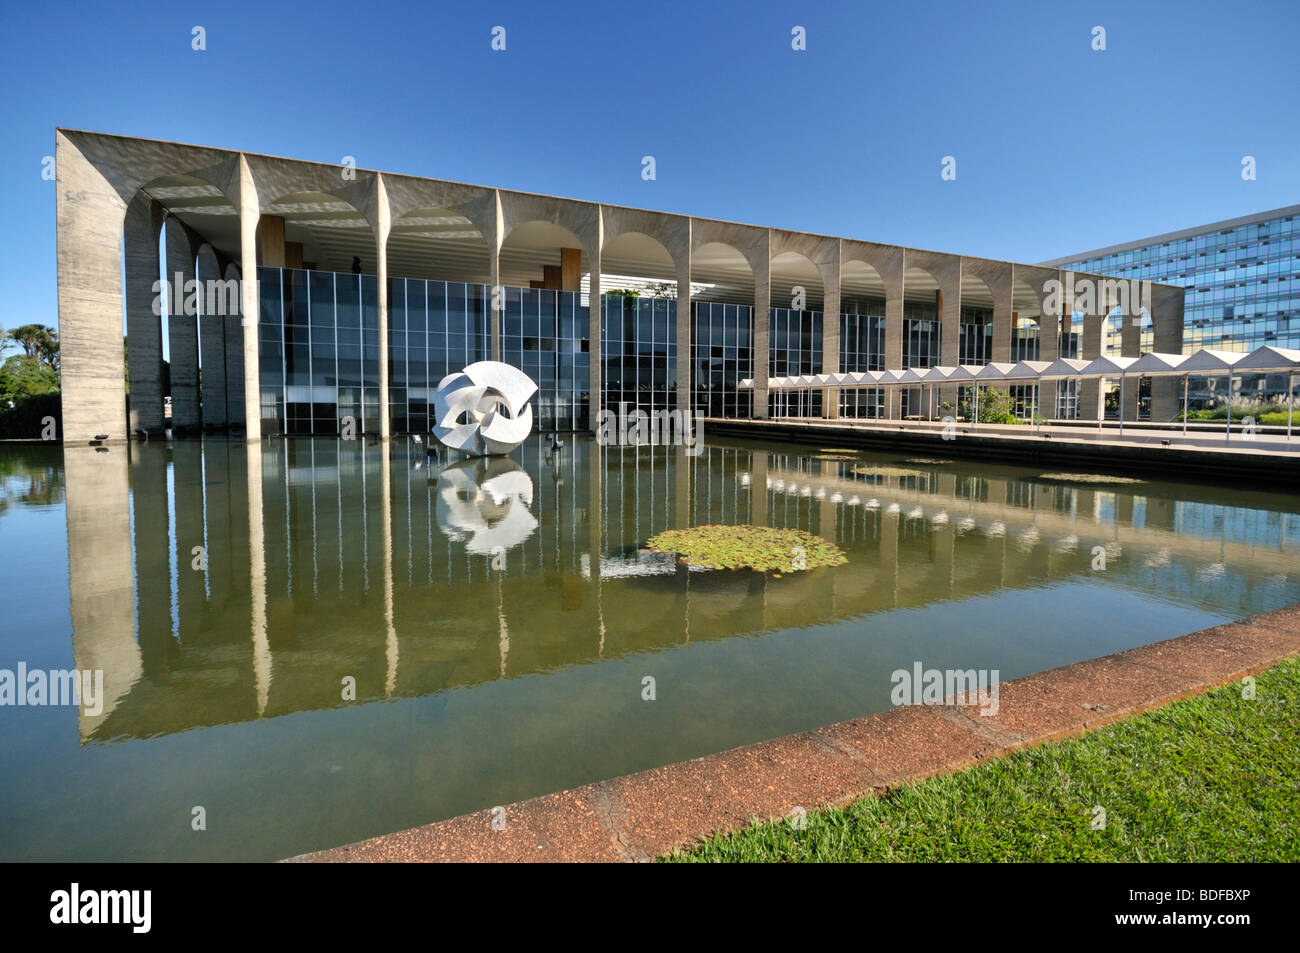 Itamaraty Palace, the Ministry of Foreign Affairs, designed by the architect Oscar Niemeyer, Brasilia, Distrito Federal, Brazil Stock Photo